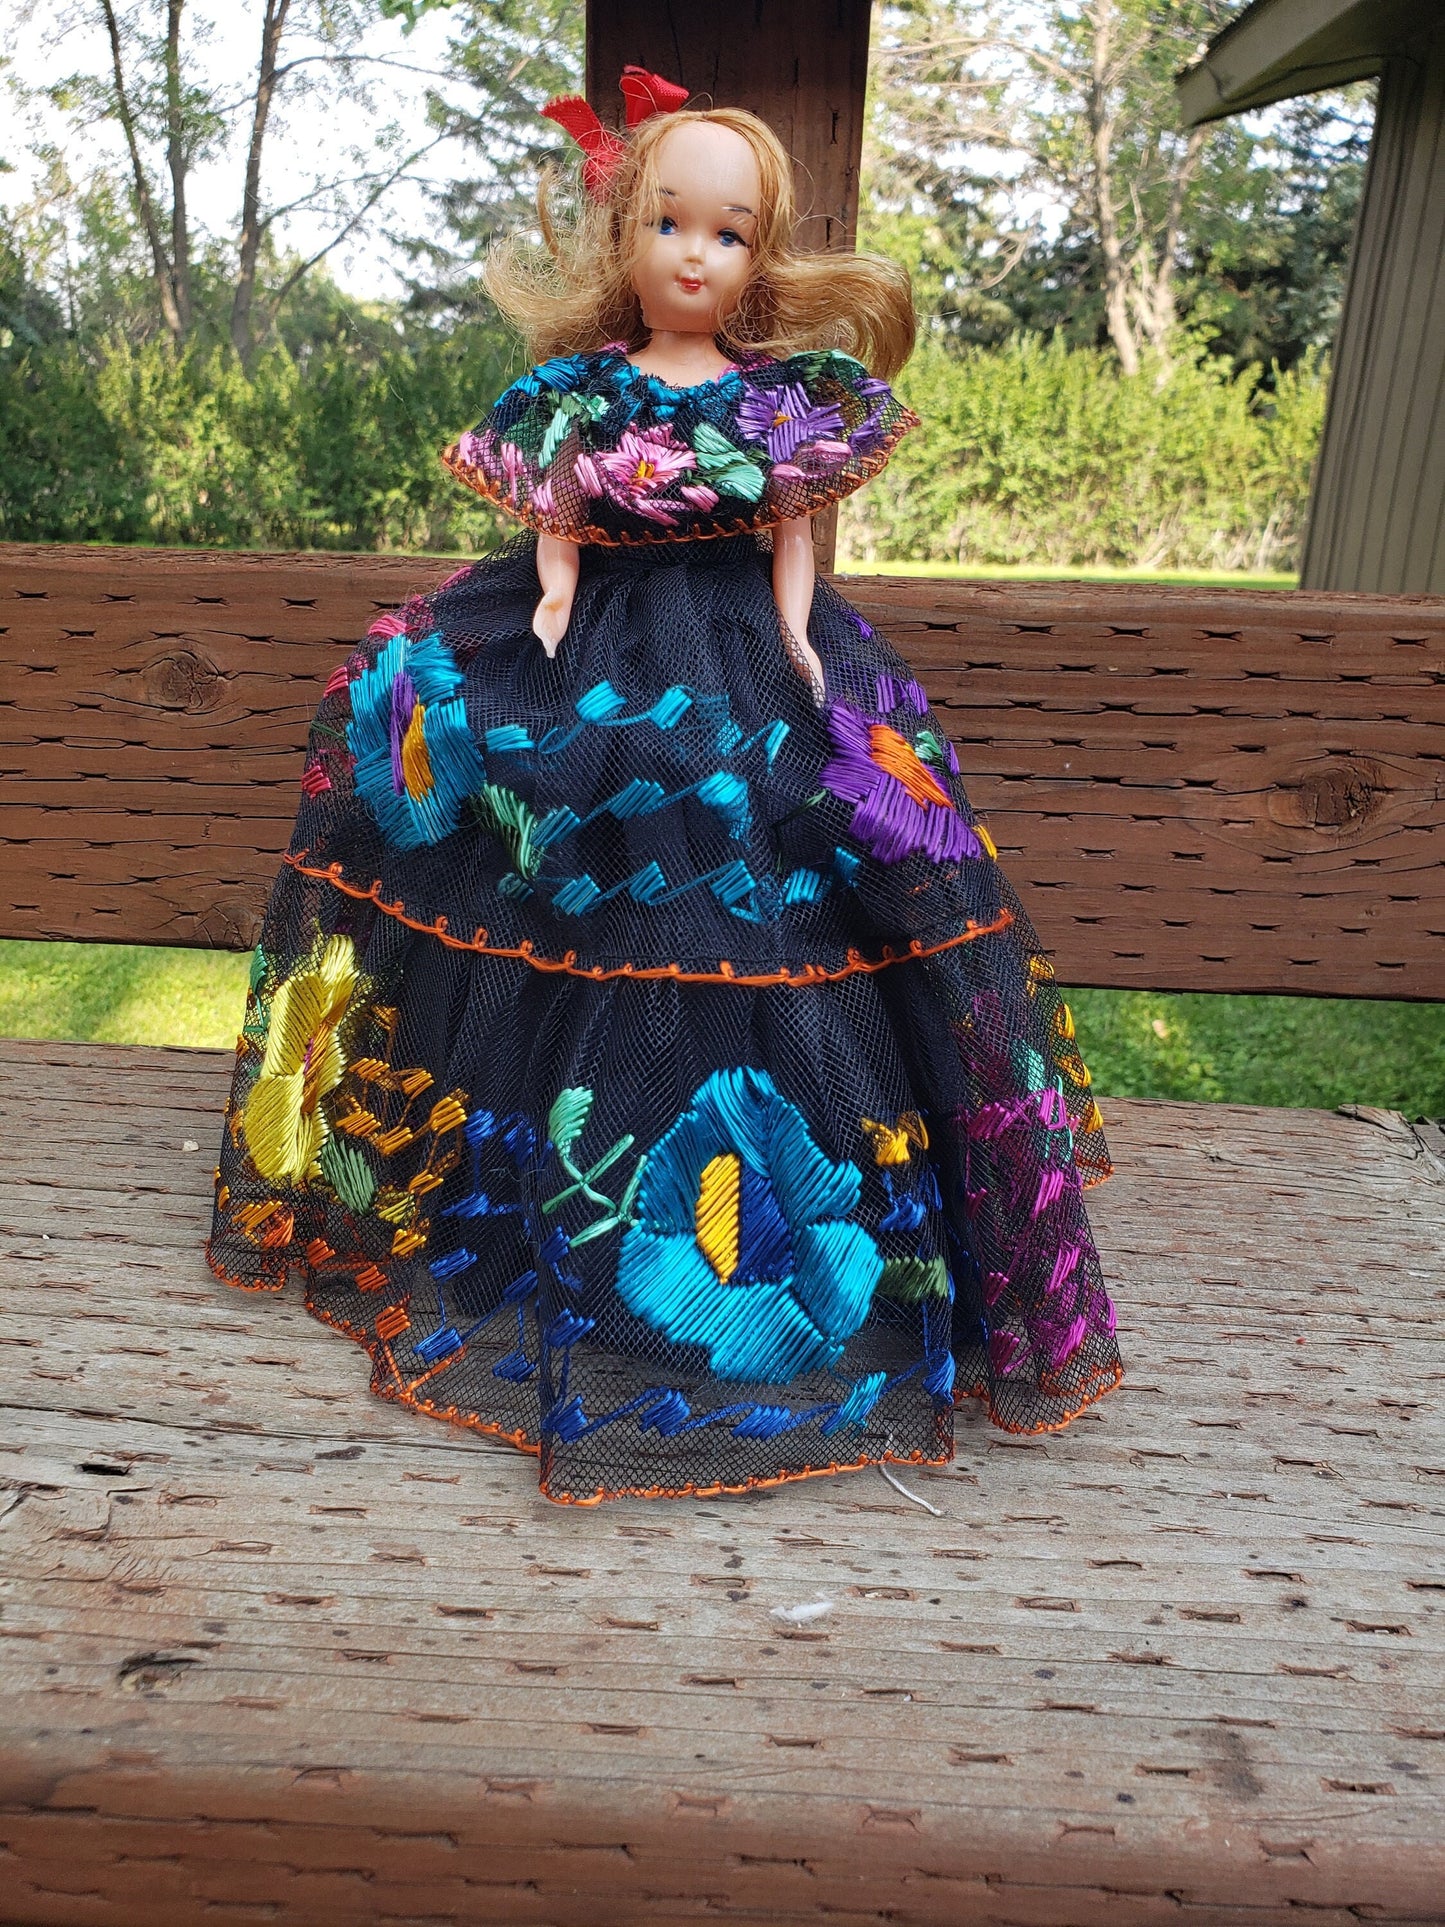 Vintage Doll in Embroidered Chiapaneca Dress